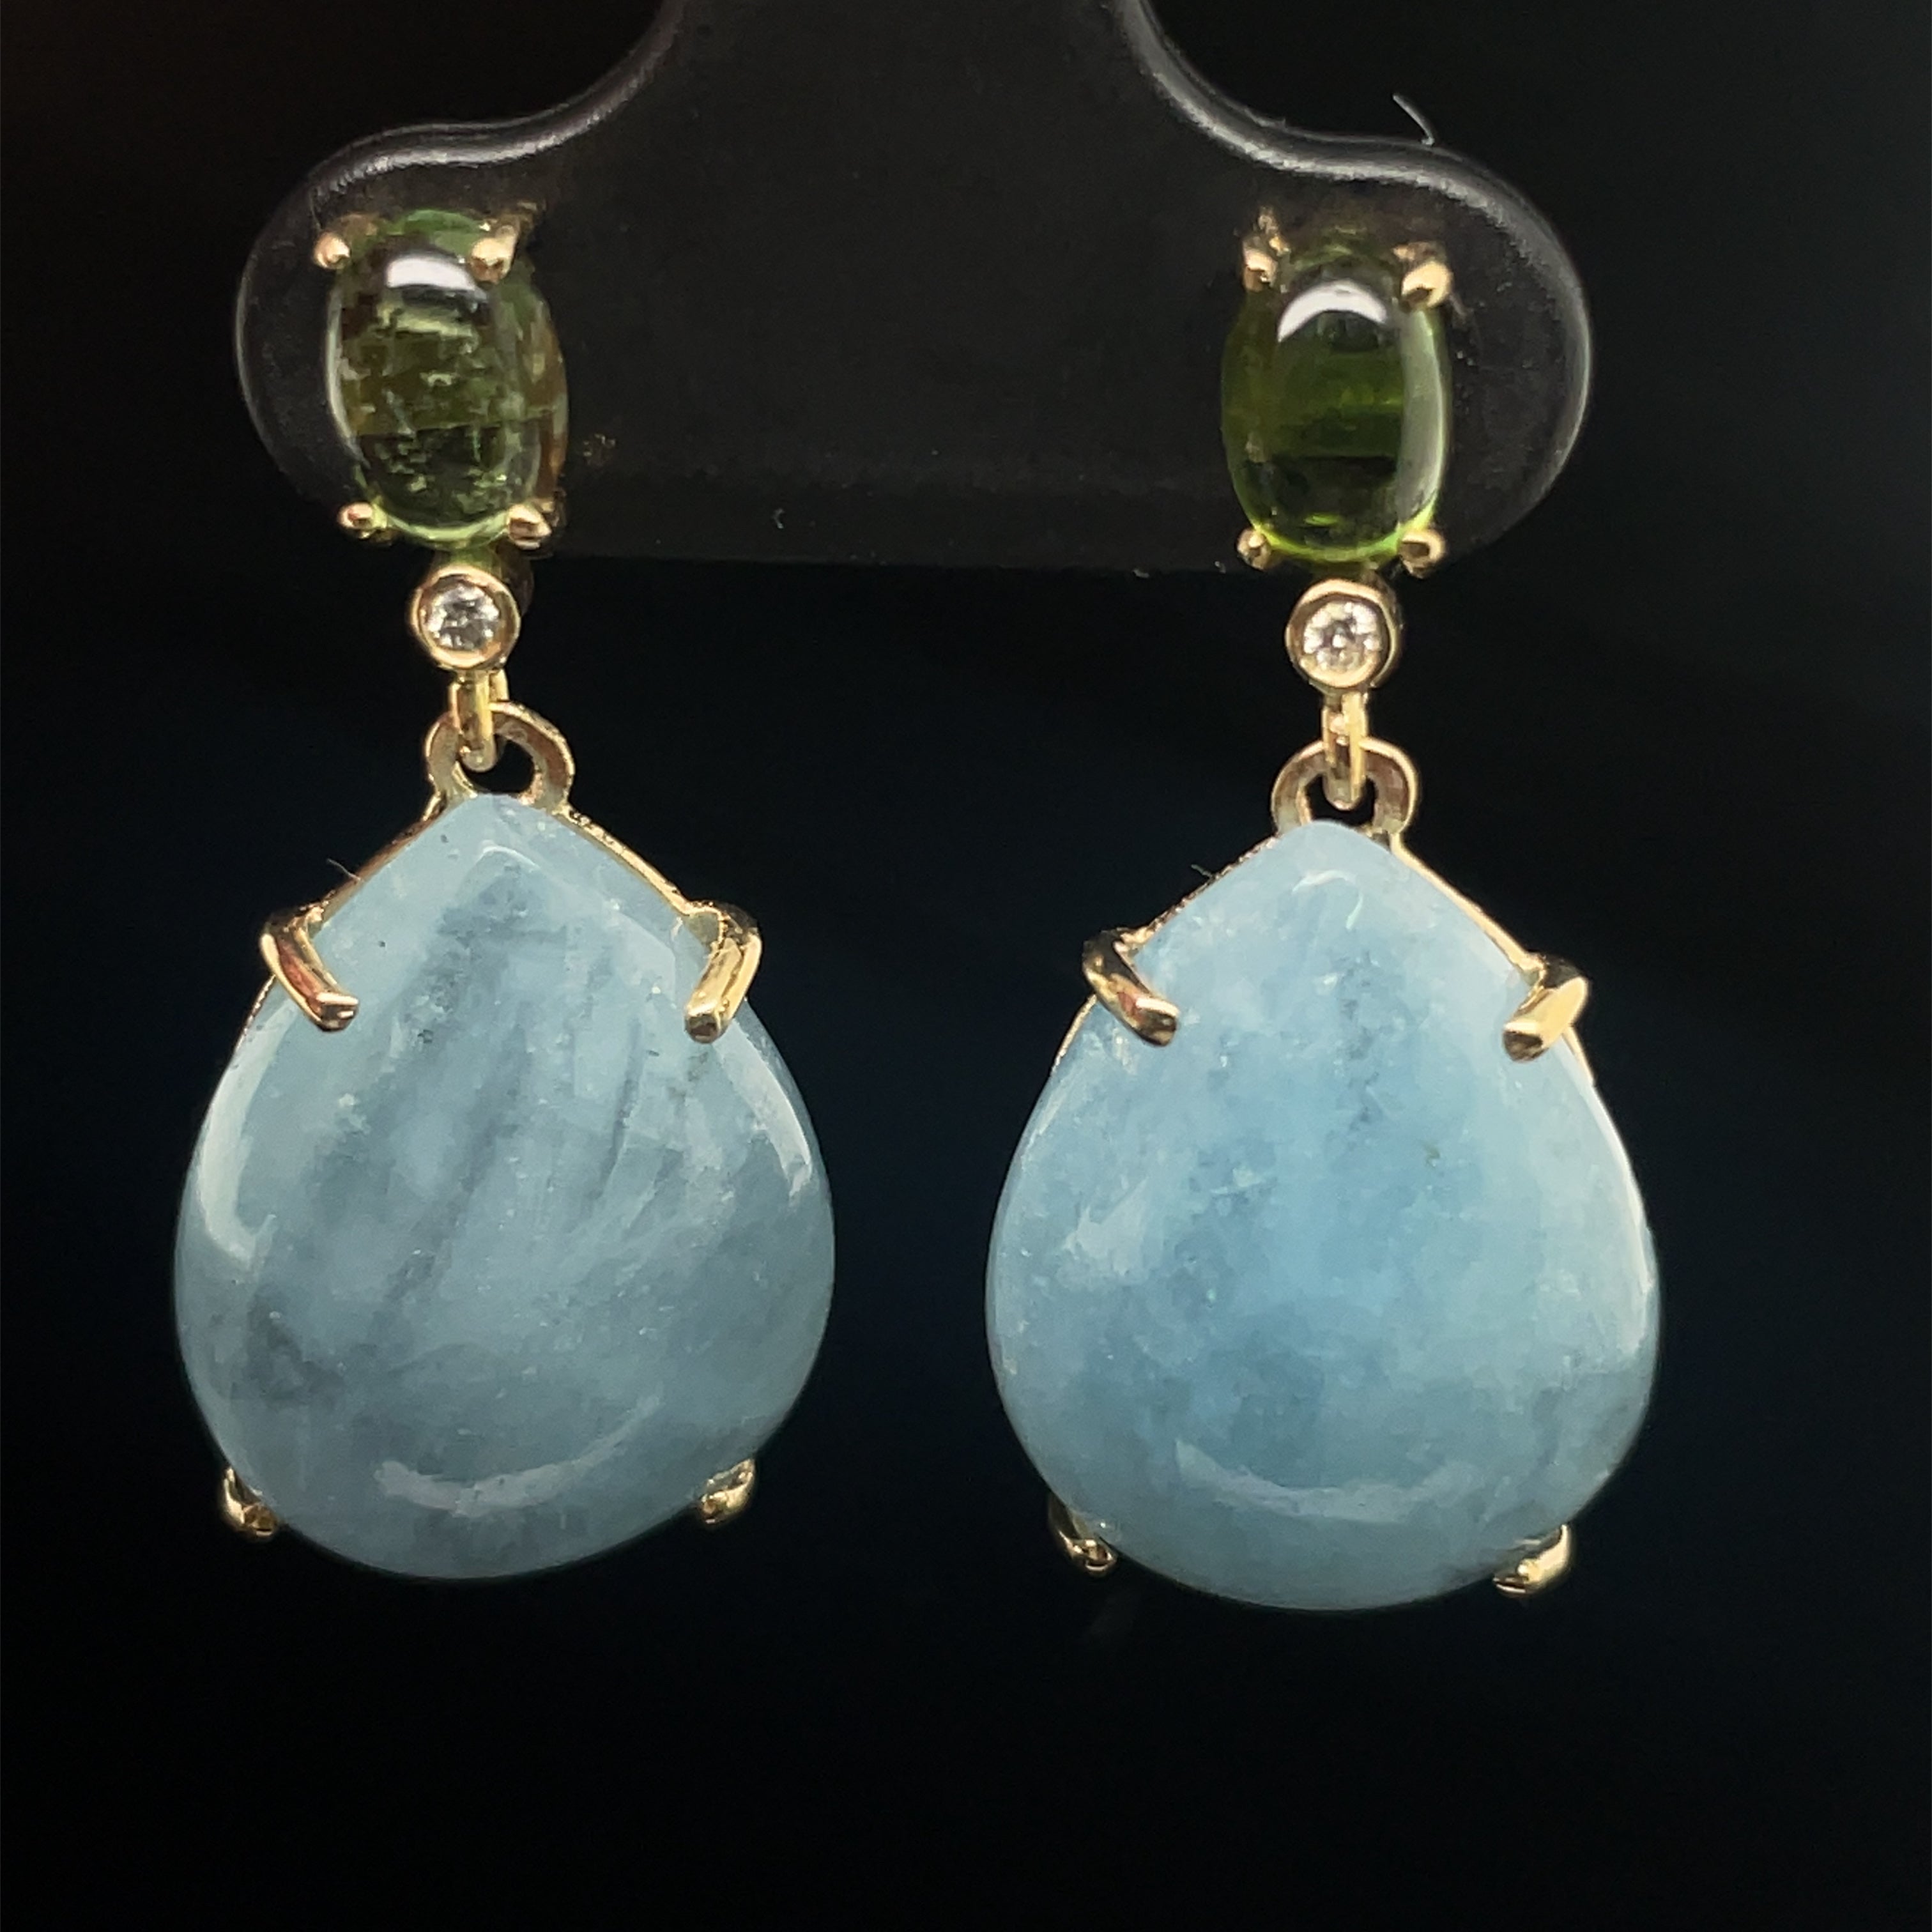 These precious earrings are securely set in 14k yellow gold to showcase the glimmering hues of the aquamarine cabochons and tourmalines, creating a stunning combination of beauty and elegance. 27 x 13 mm with secure friction backs.